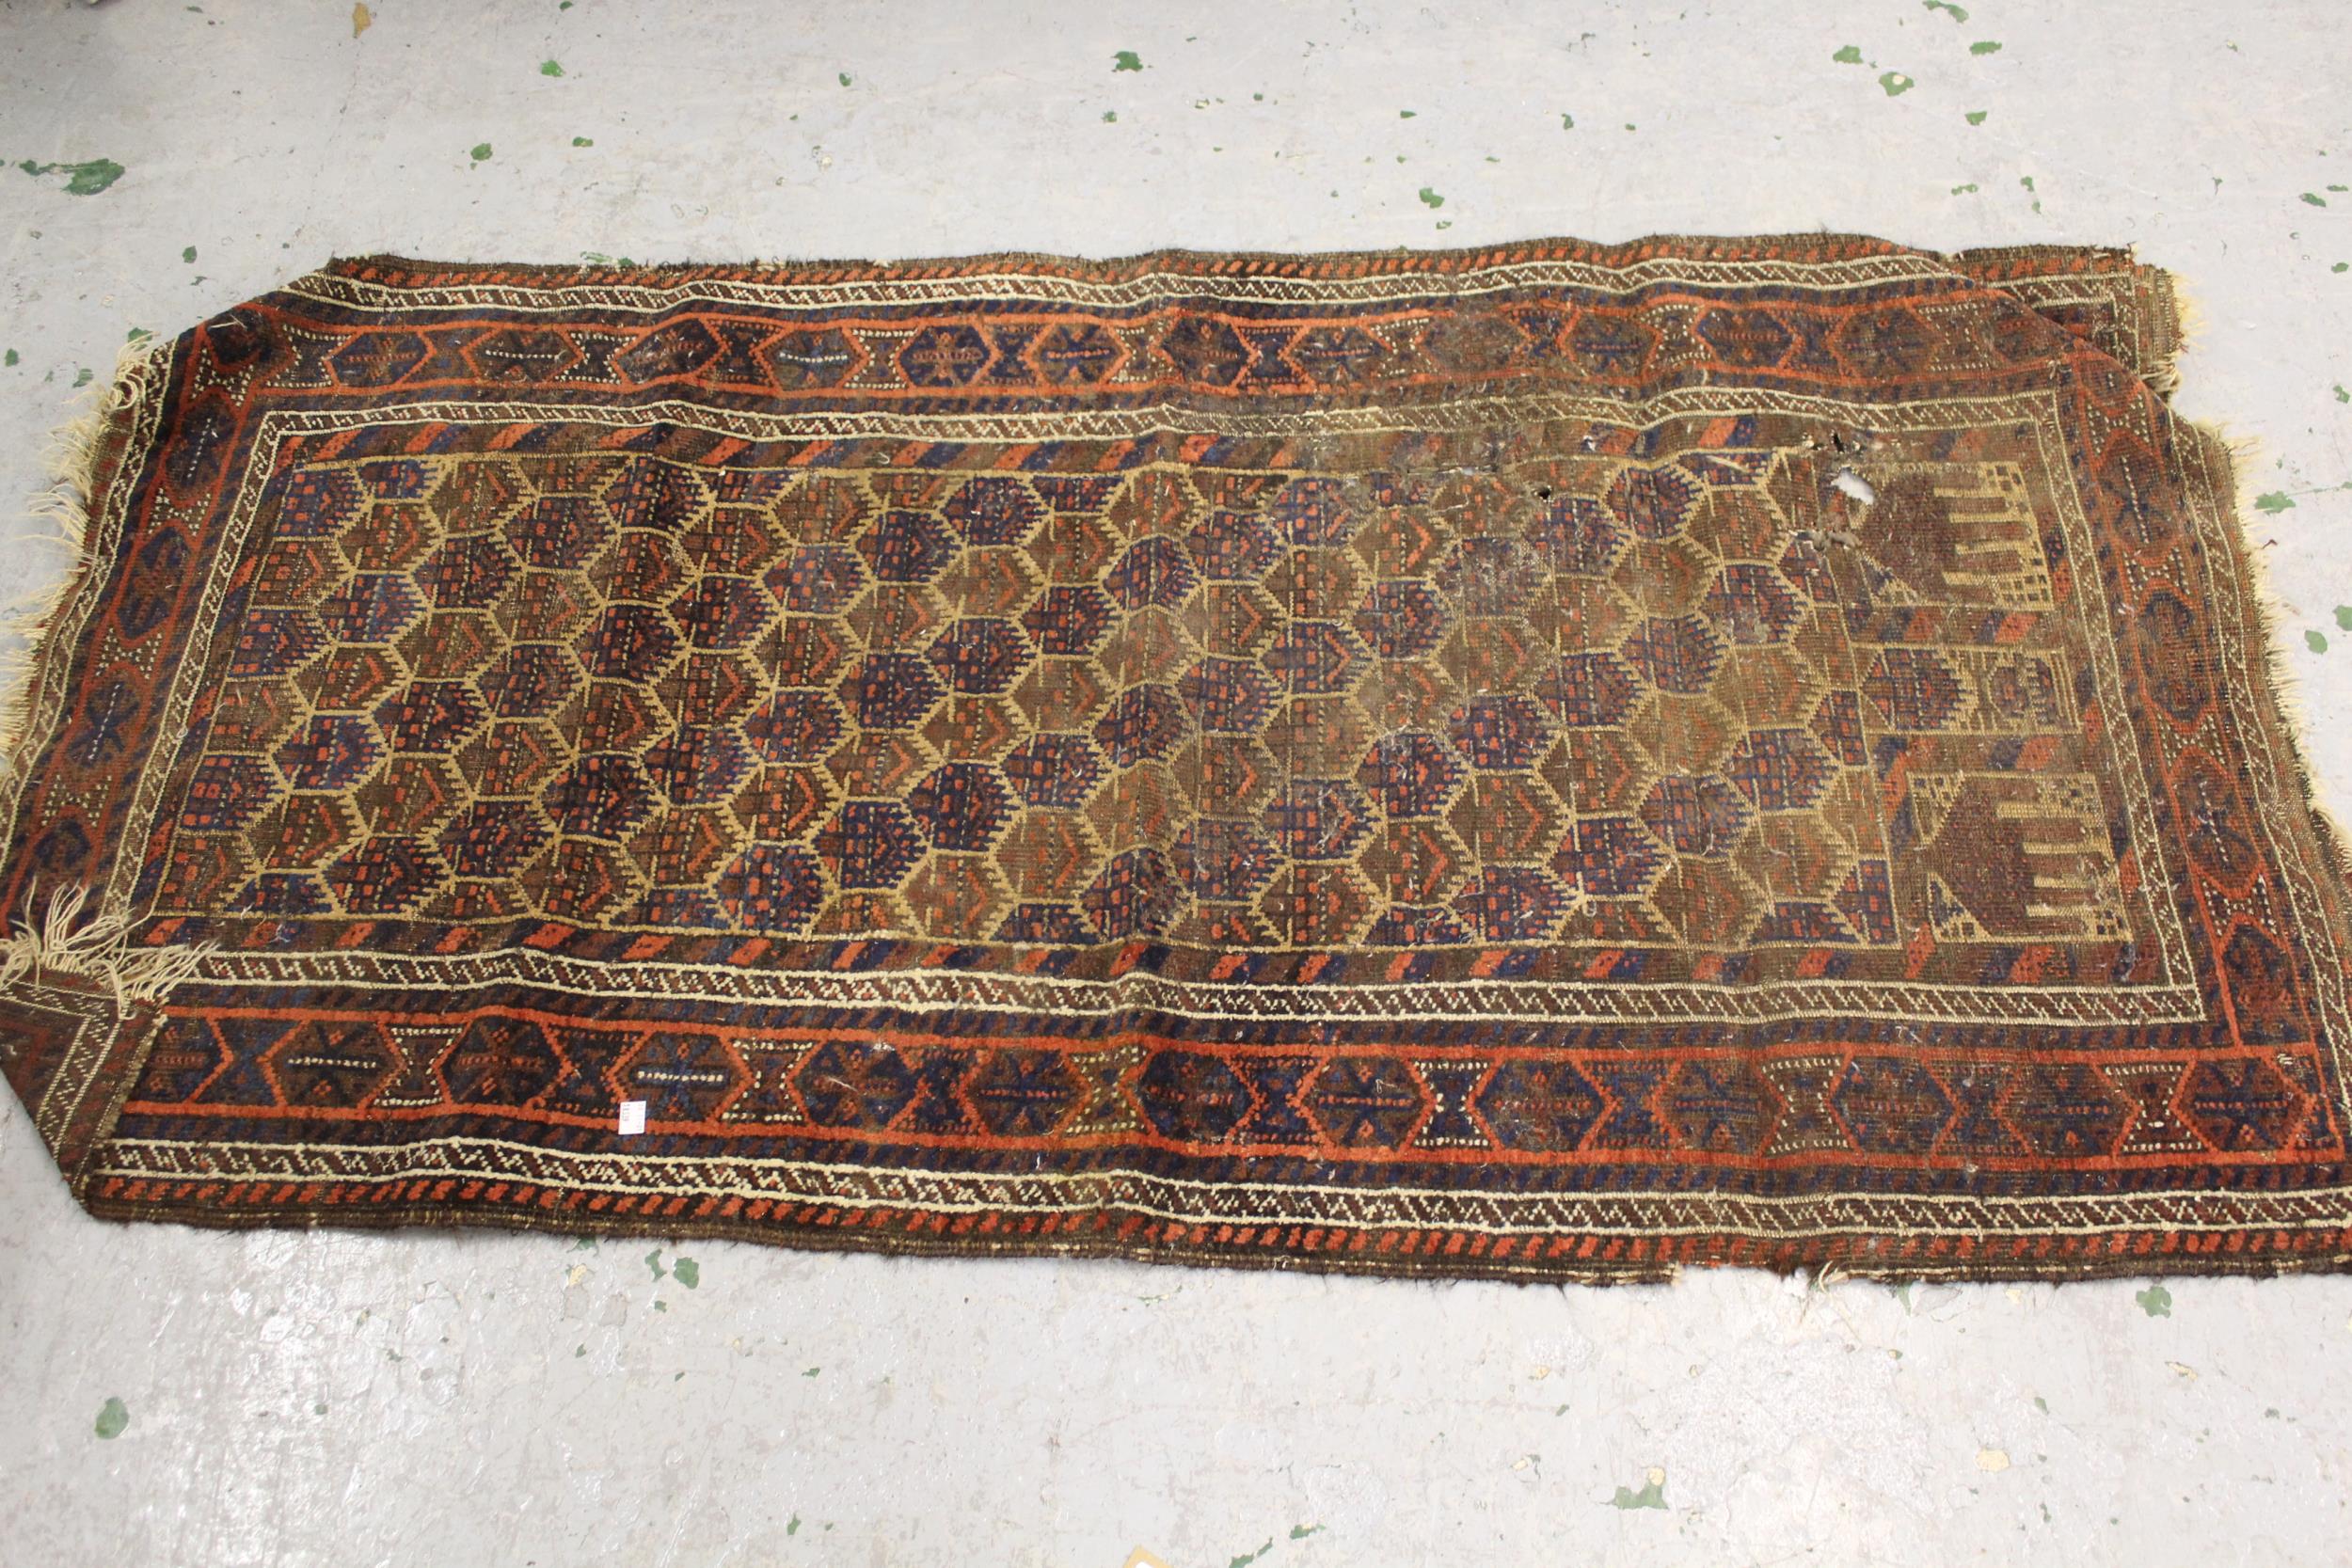 Small Belouch rug of geometric design with multiple borders, 24ins x 41ins together with another, - Image 2 of 3